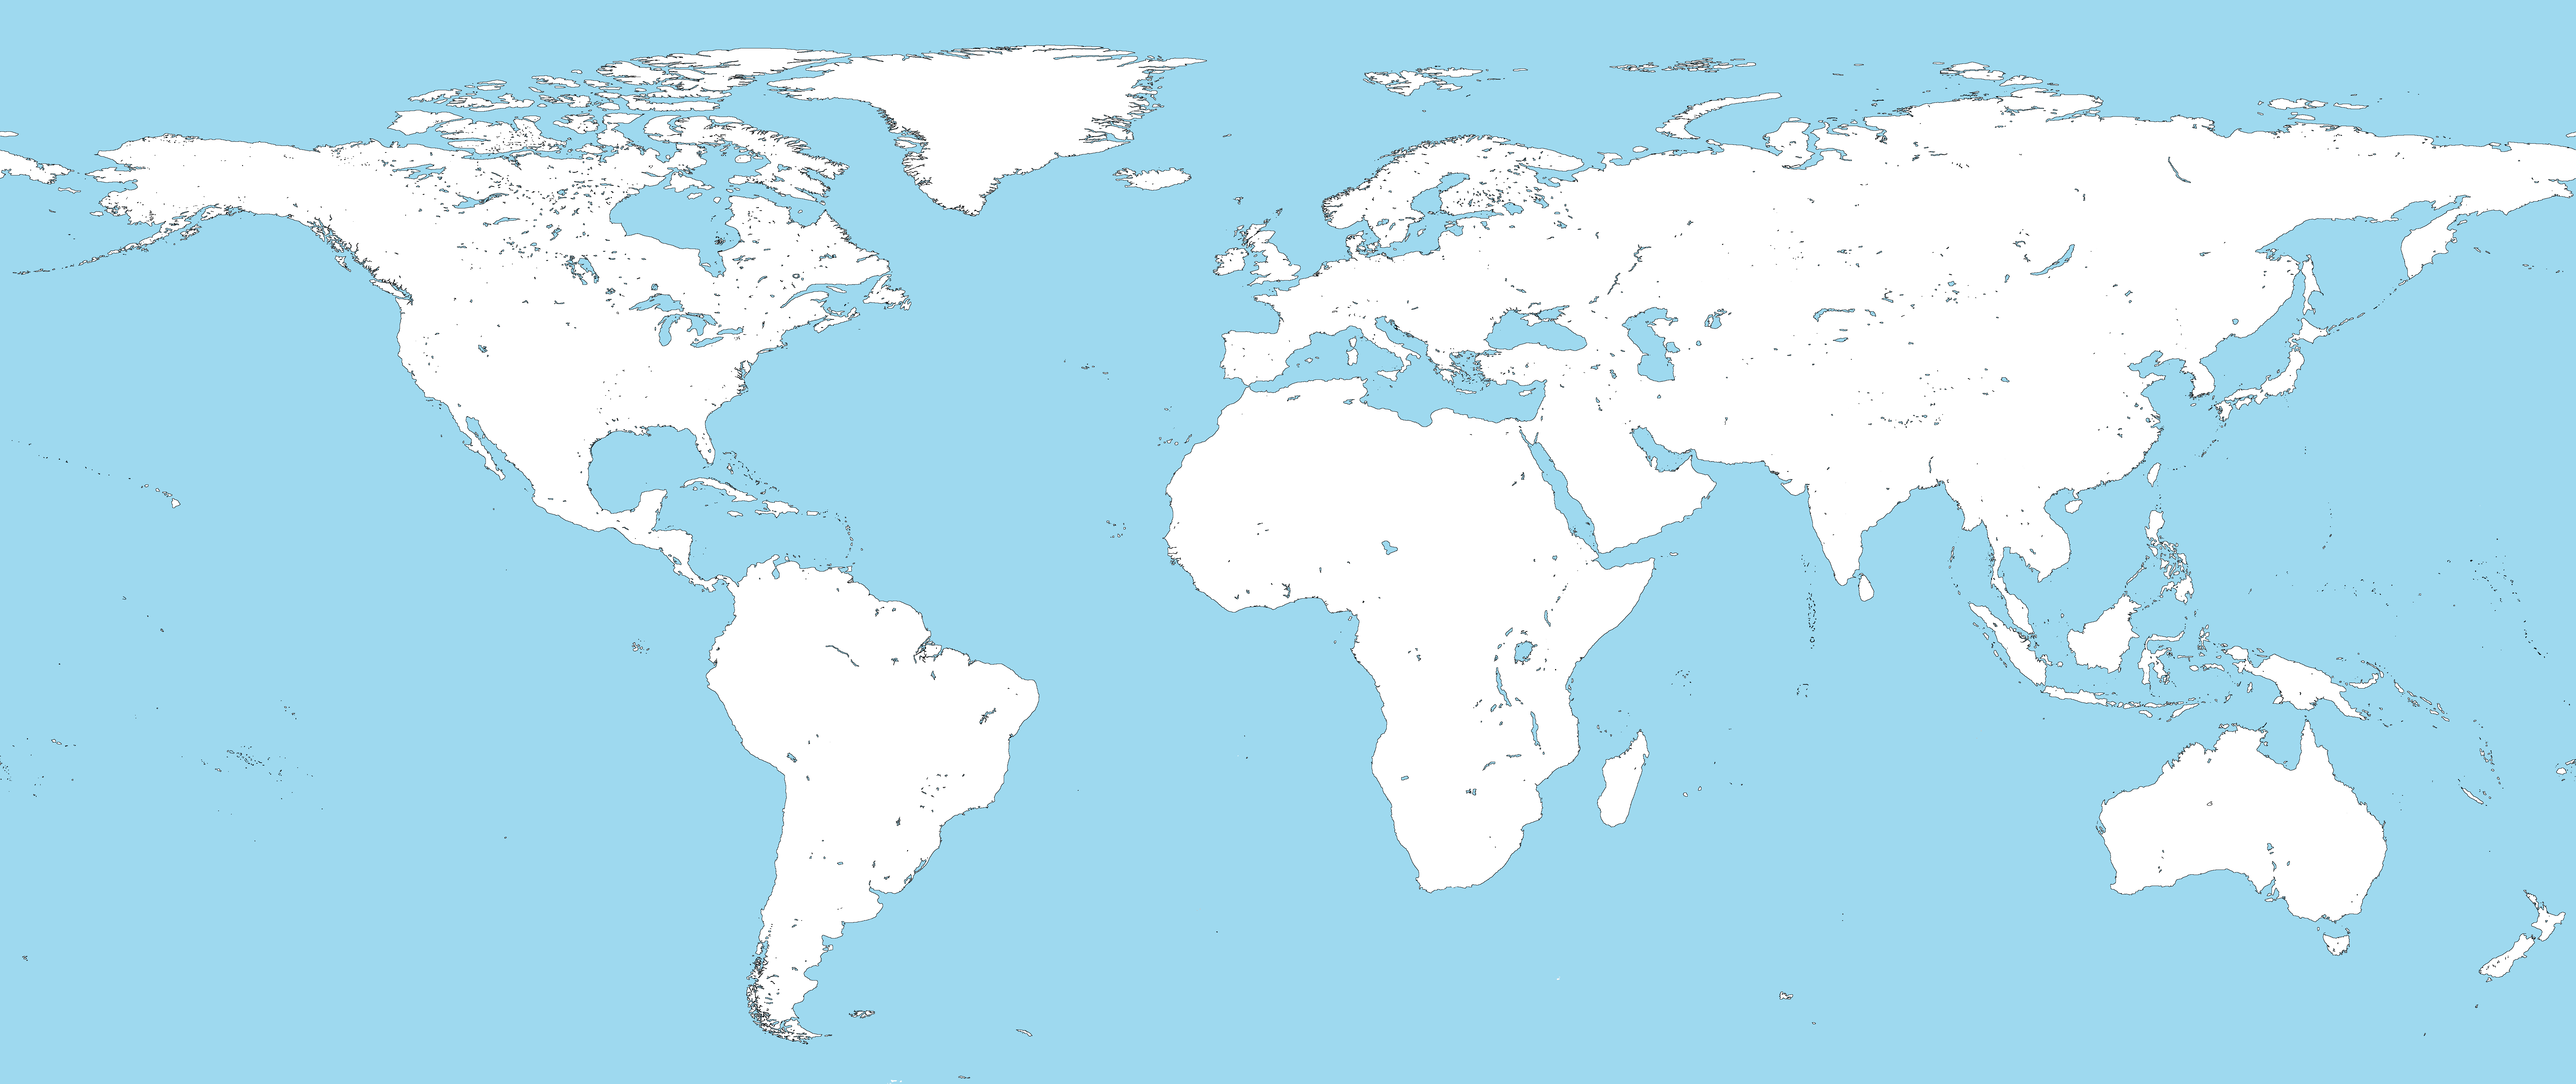 Map Without Names Of Countries 